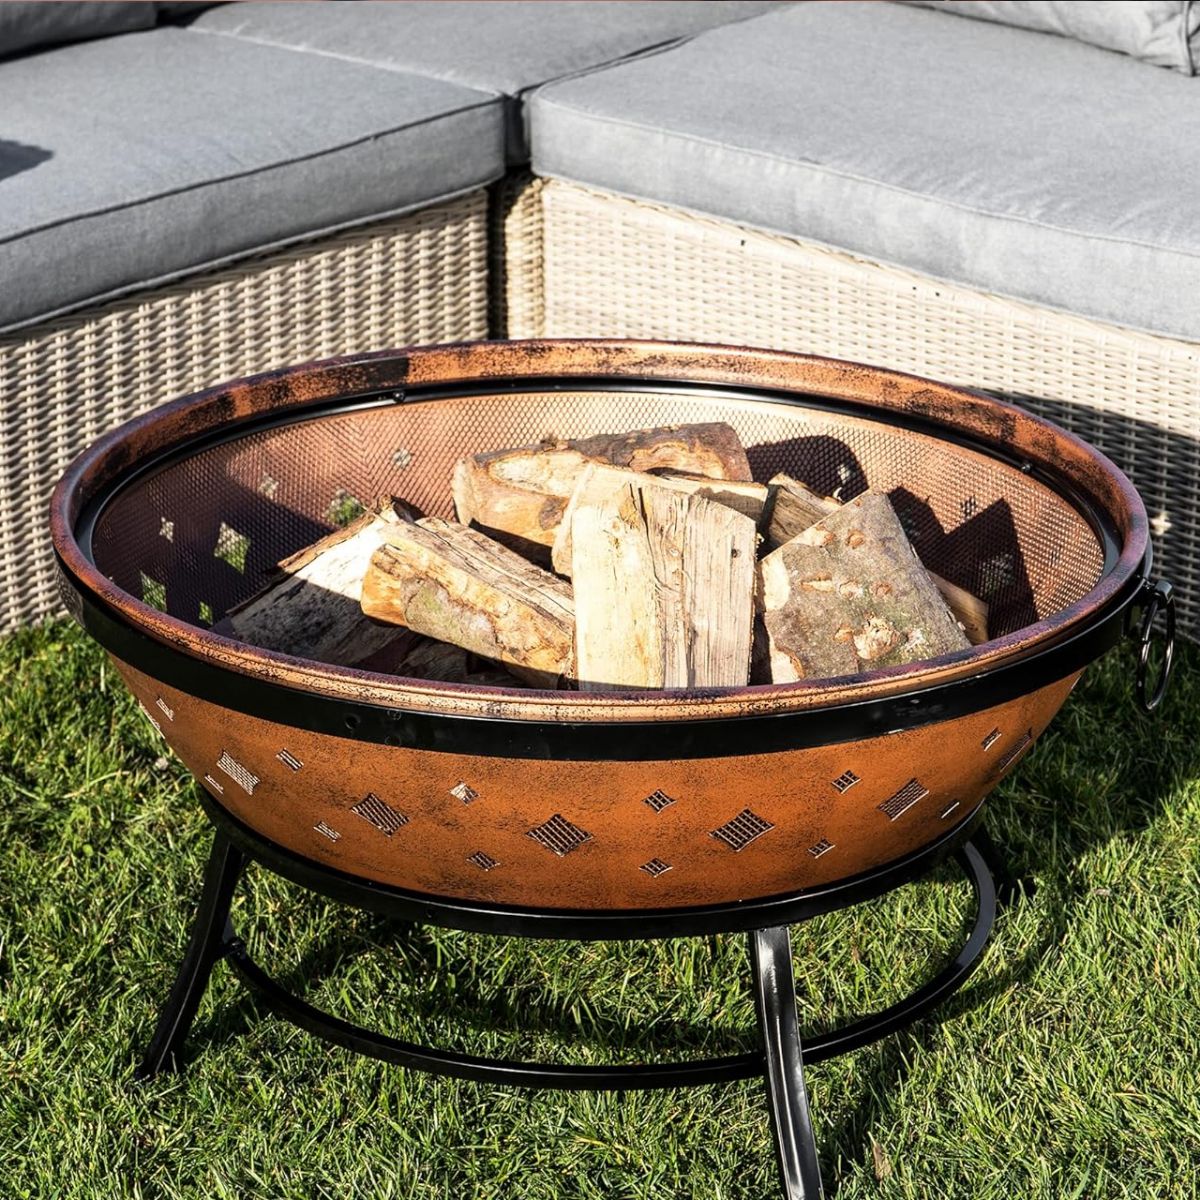 Teamson Home Large Round Wood Burning Fire Pit Steel Fire Pit